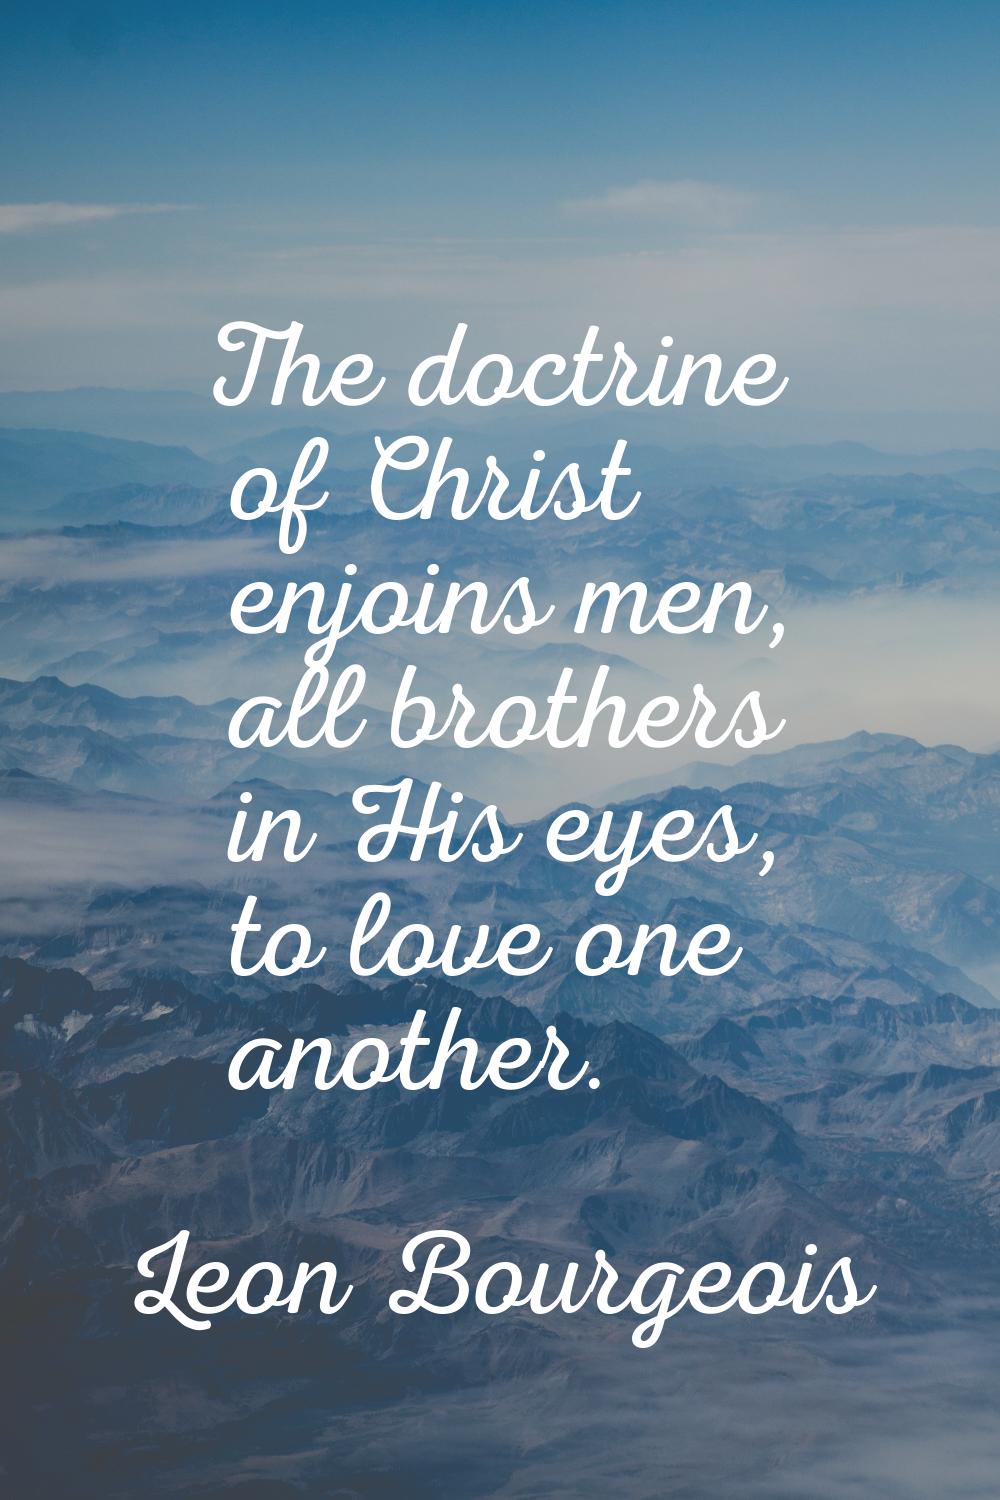 The doctrine of Christ enjoins men, all brothers in His eyes, to love one another.